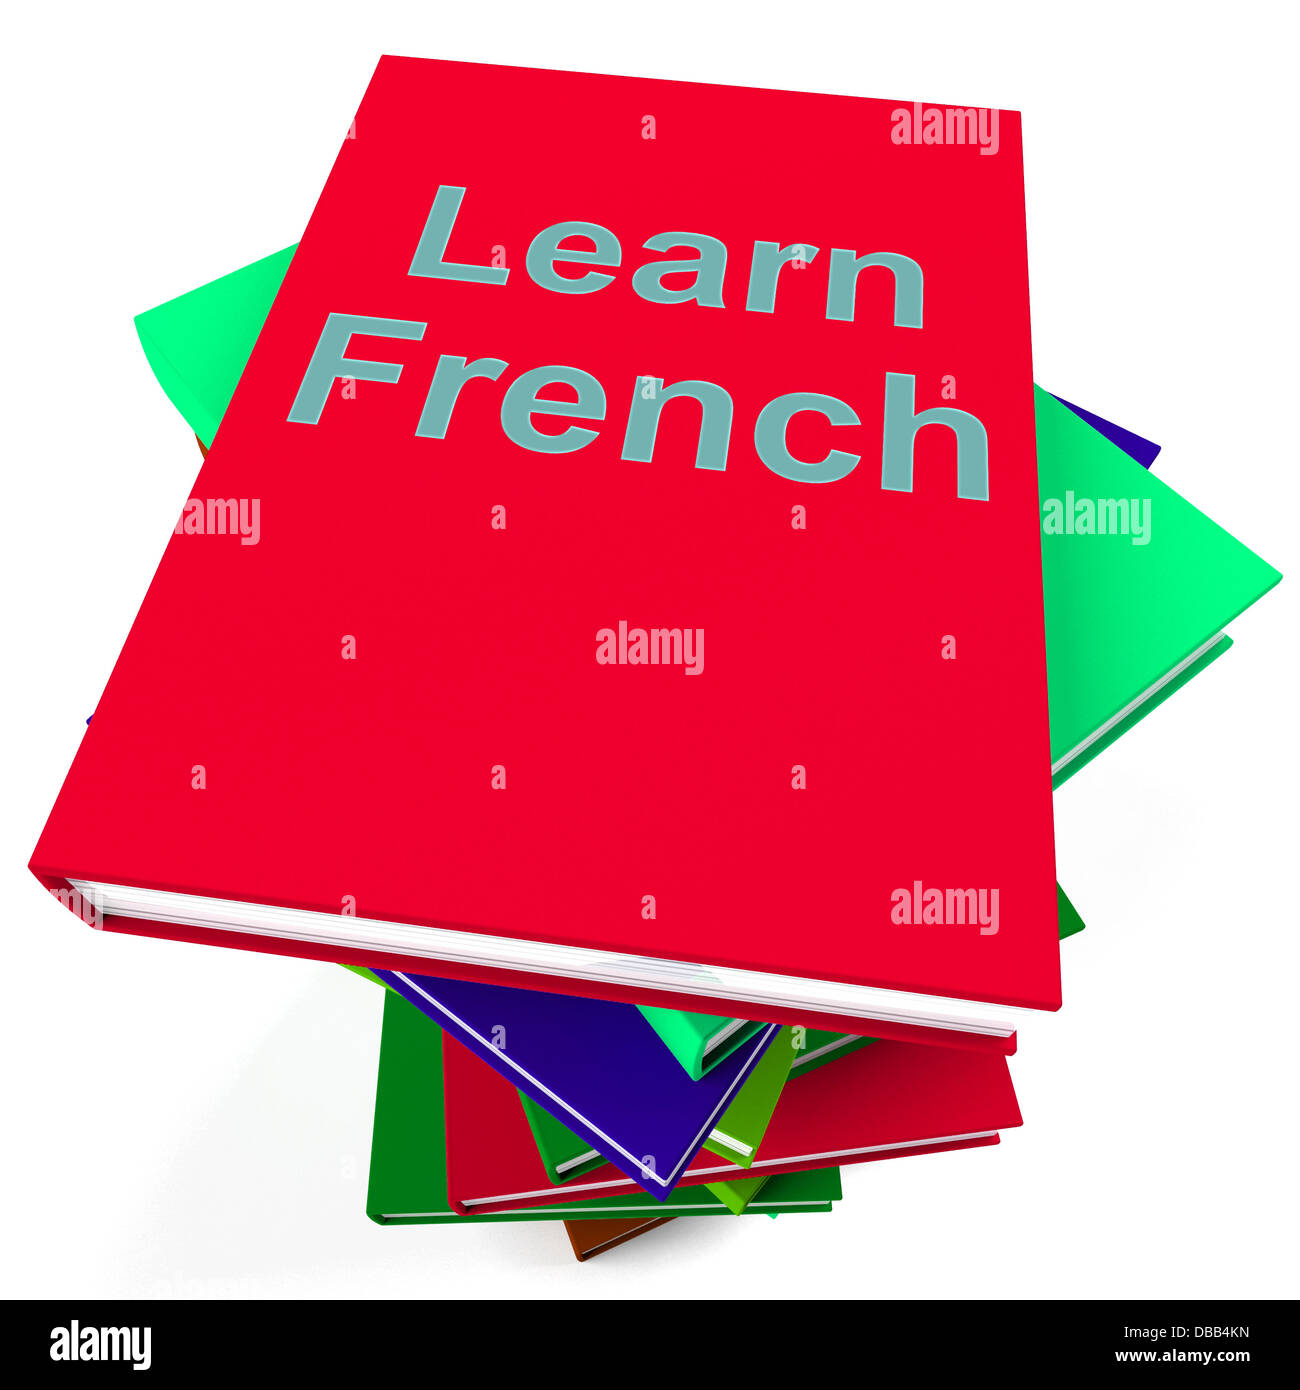 Learn French Book For Studying A Language Stock Photo